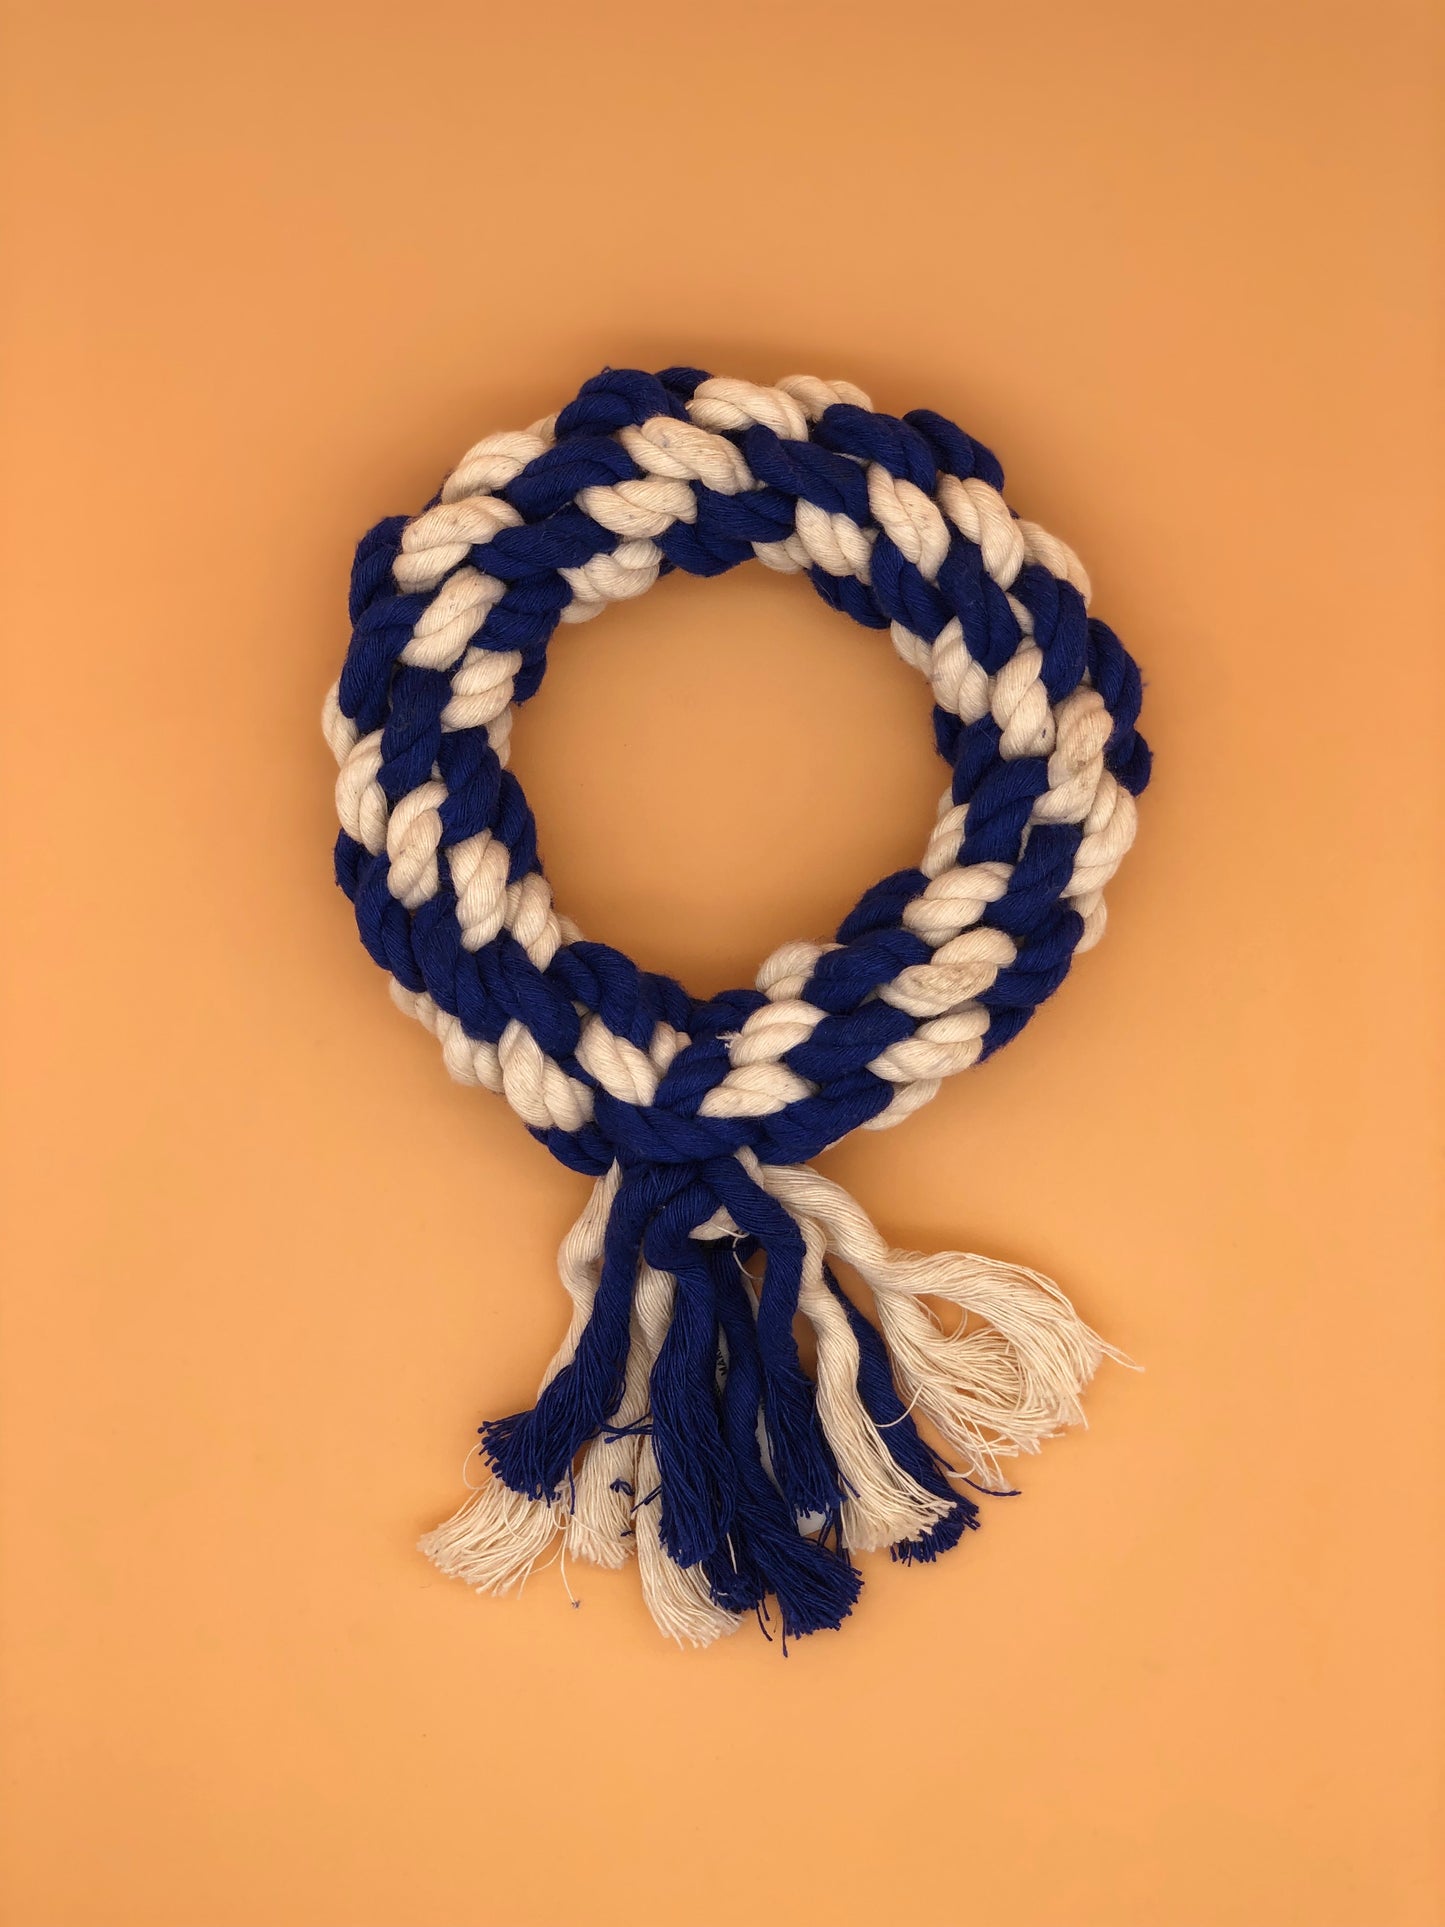 Wreath Rope Toy